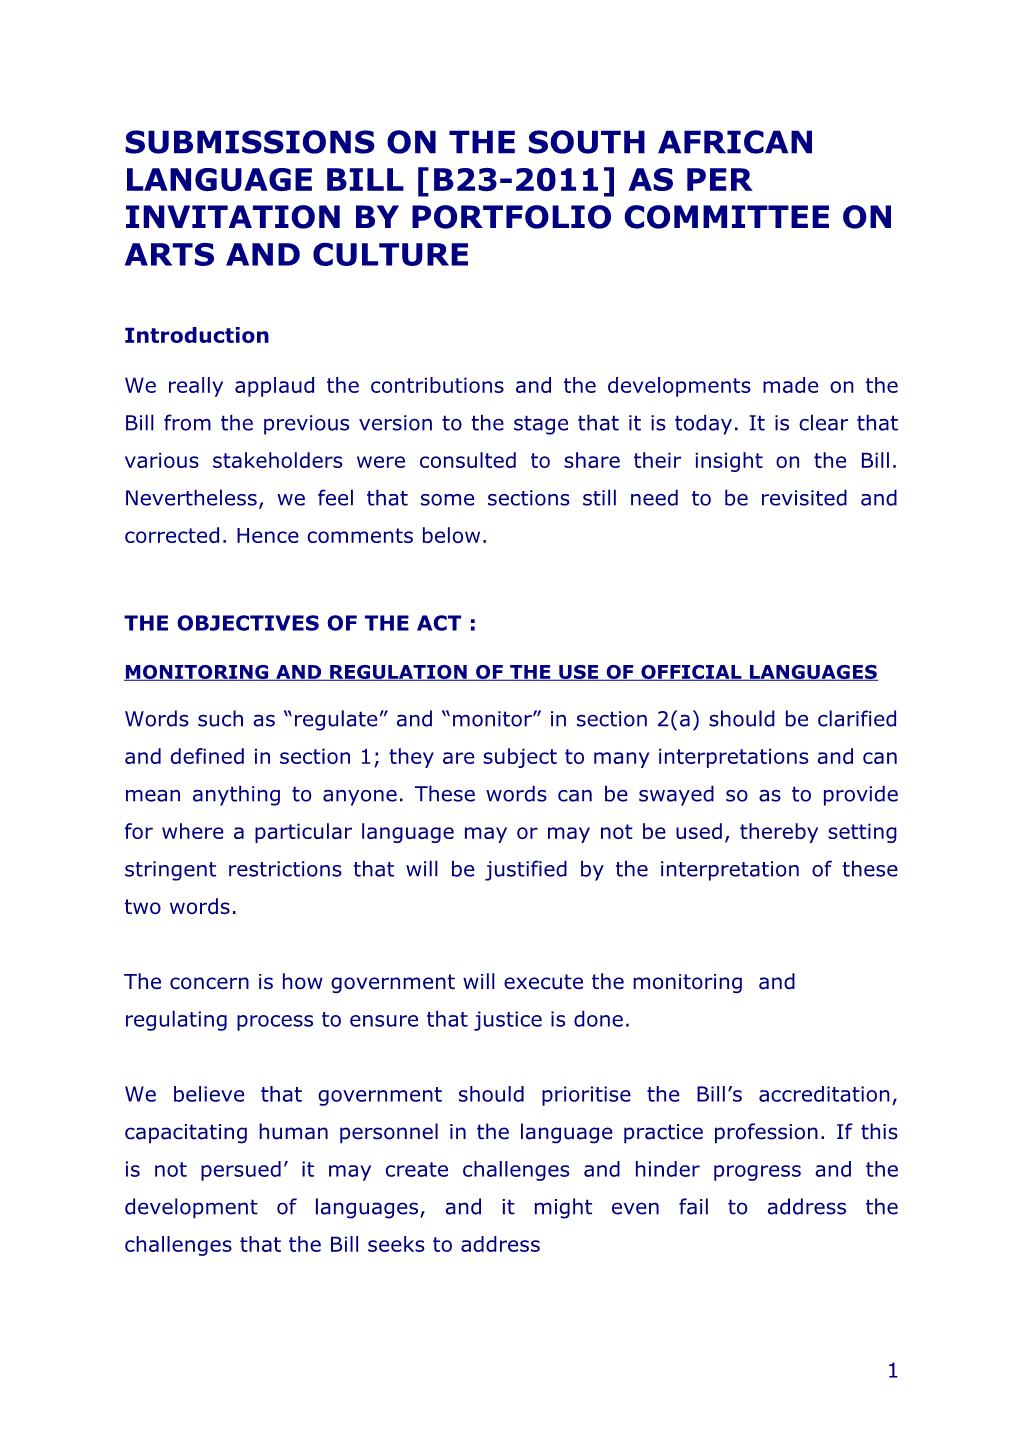 Monitoring and Regulation of the Use of Official Languages